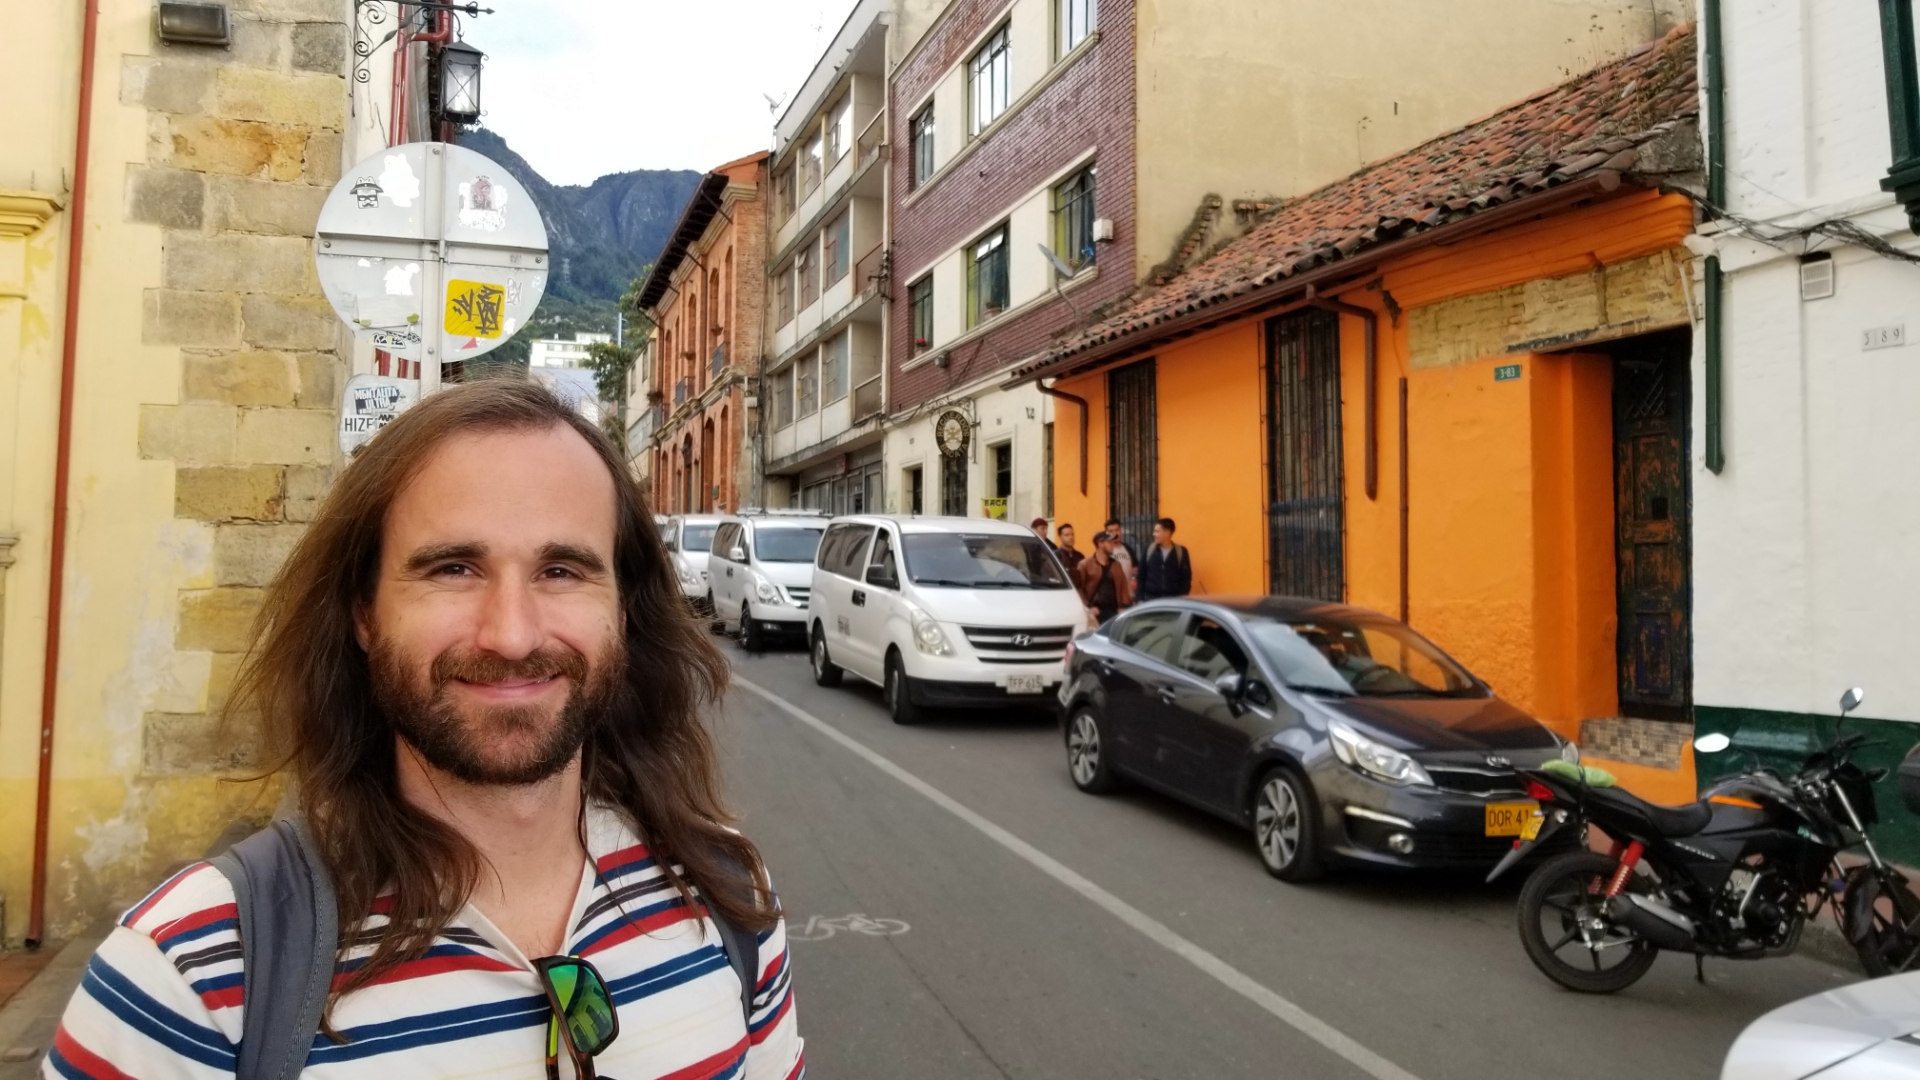 Jimmy exploring the streets of Bogota